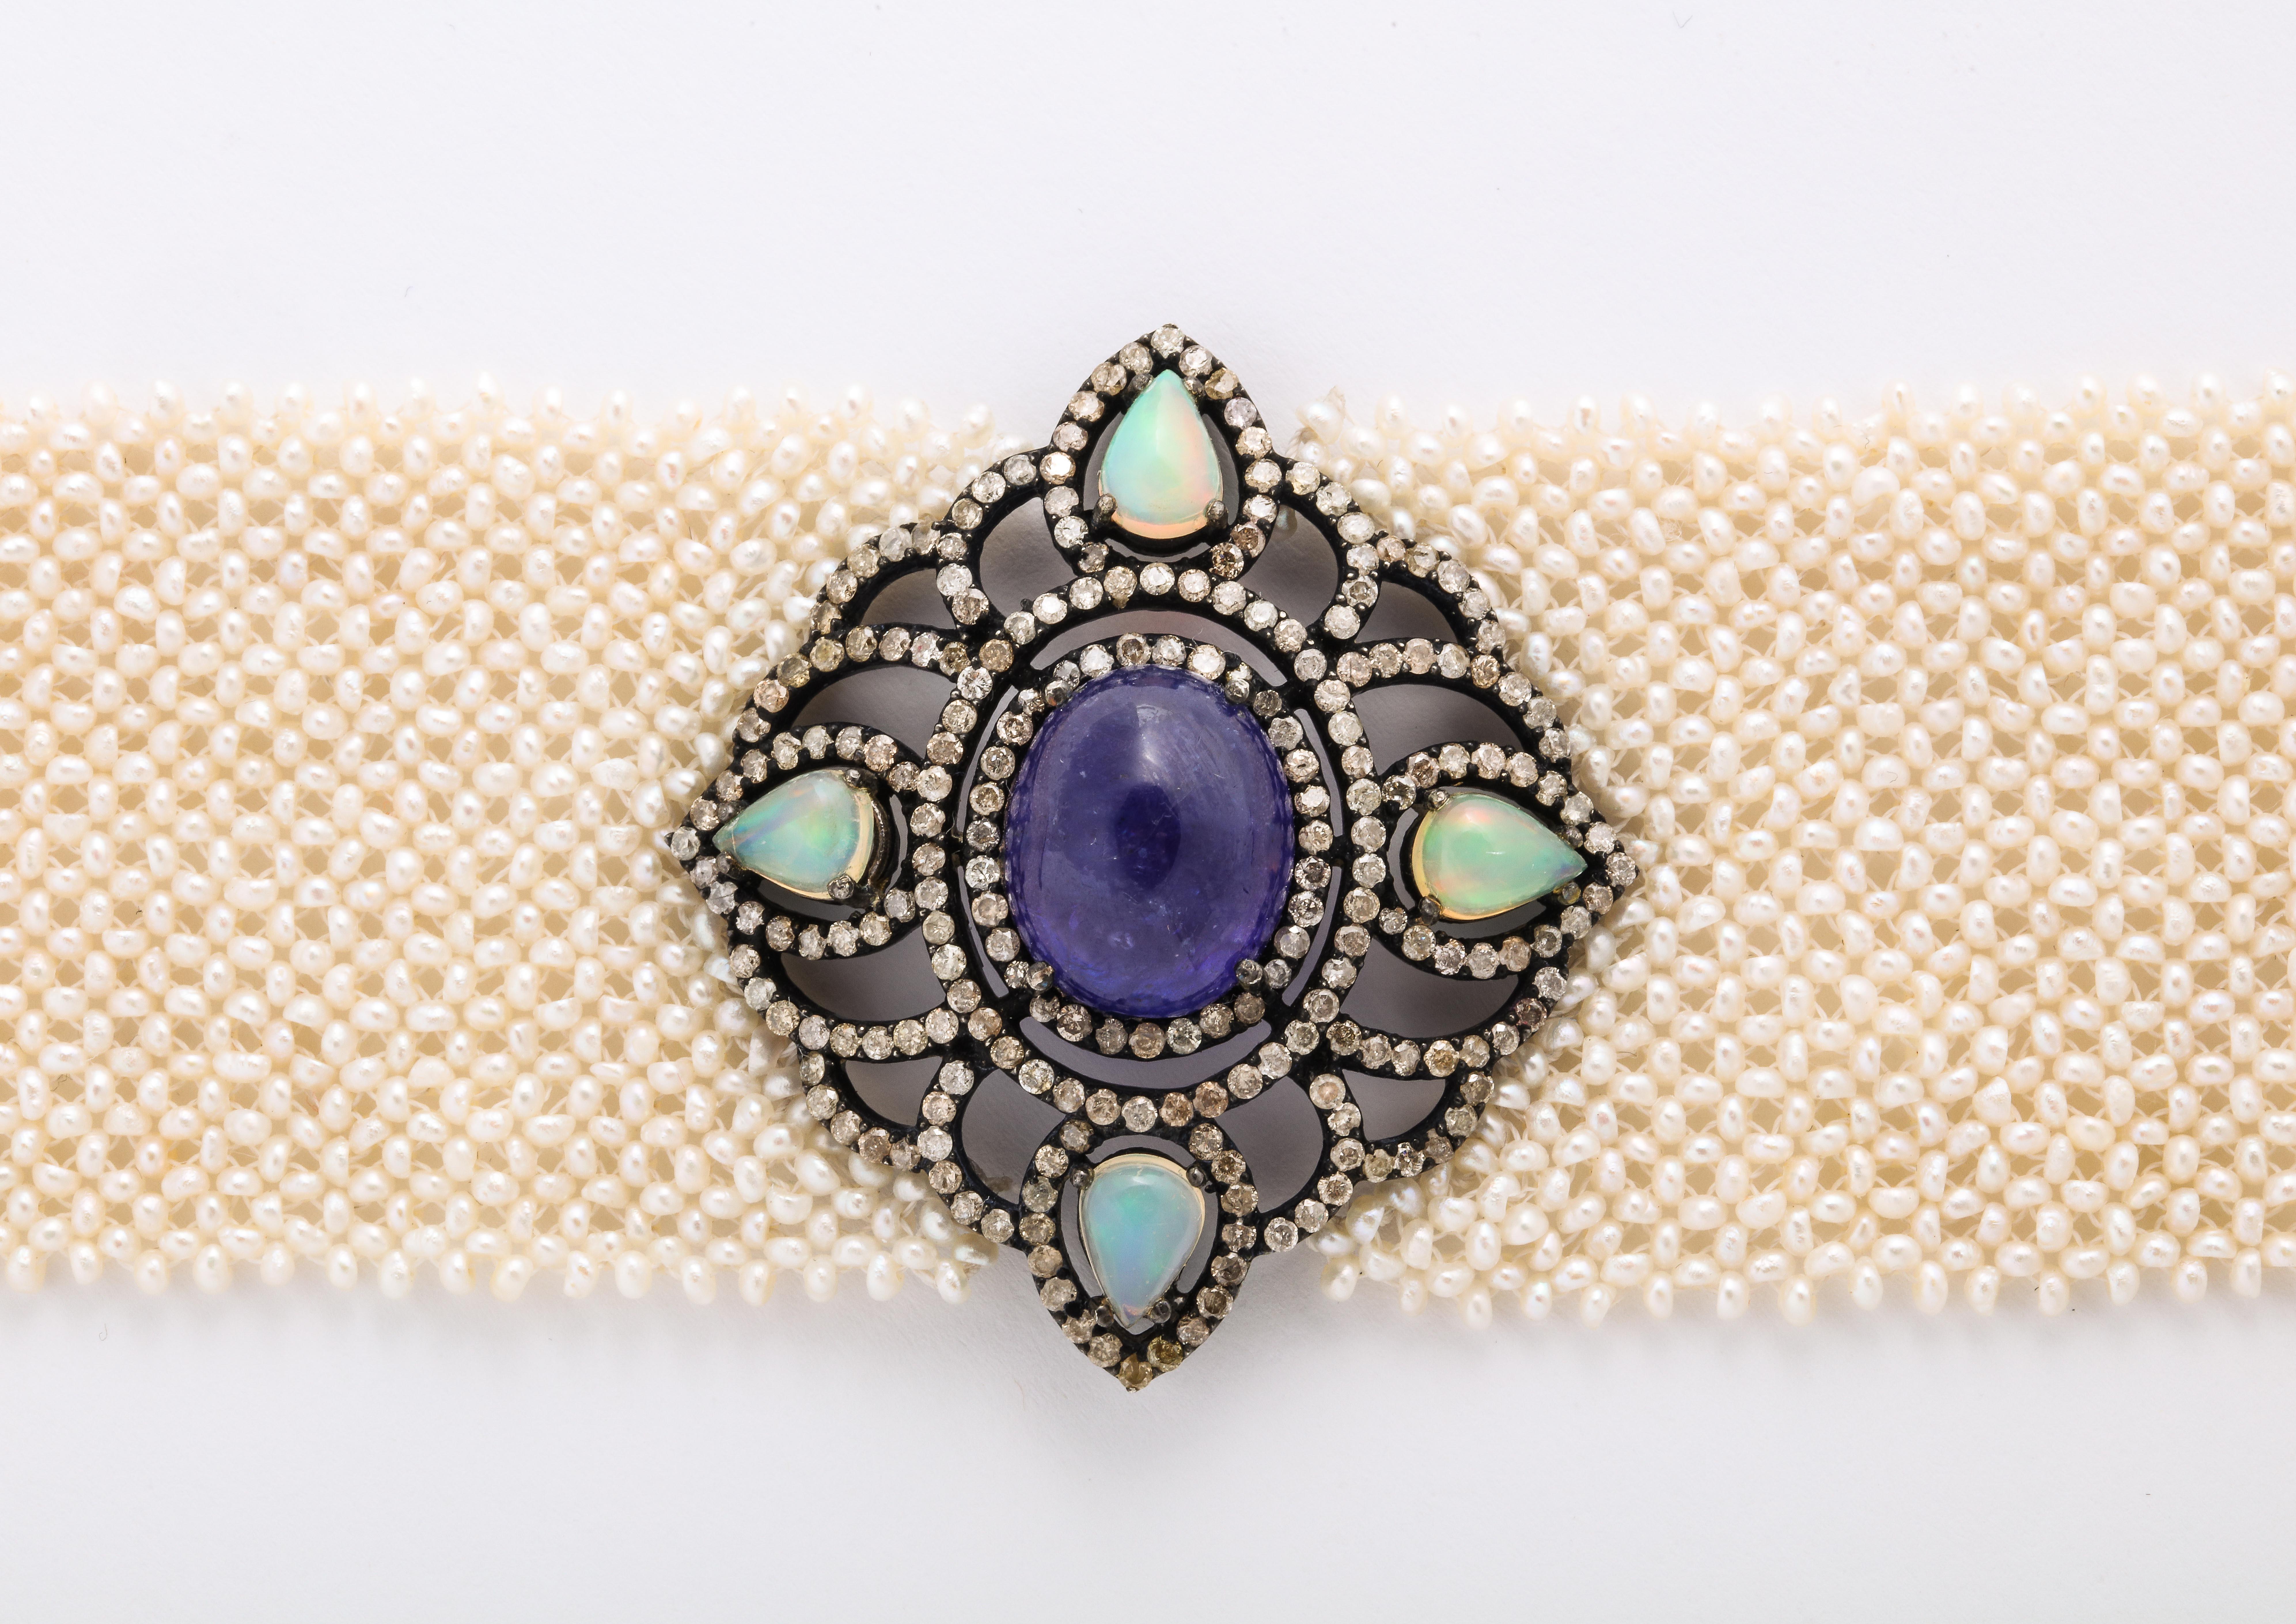 Diamond and seed mesh pearl bracelet in sterling, circa 2000. 7 1/4 inches long x 1 1/2 inches wide.

Materials:
Tarnished sterling
Gold clasp
22.0 dwt 

Stones
Hand strung seed pearl mesh, Ethiopian opal 
Pear cabochons 1.20 tw
Oval sapphire